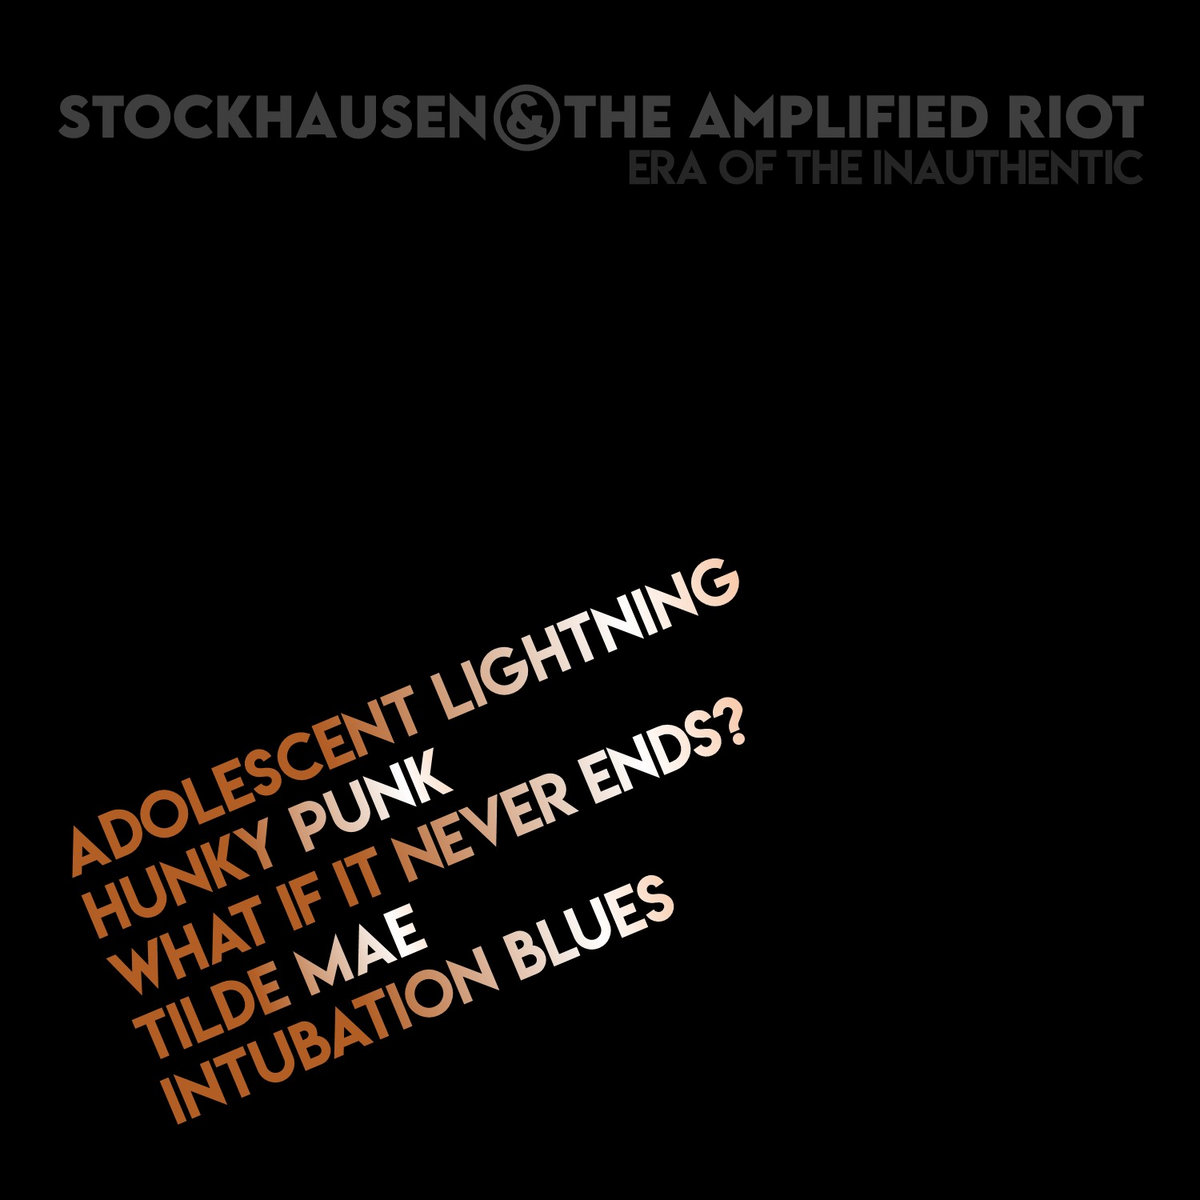 Stockhausen & The Amplified Riot - Era of the Inauthentic